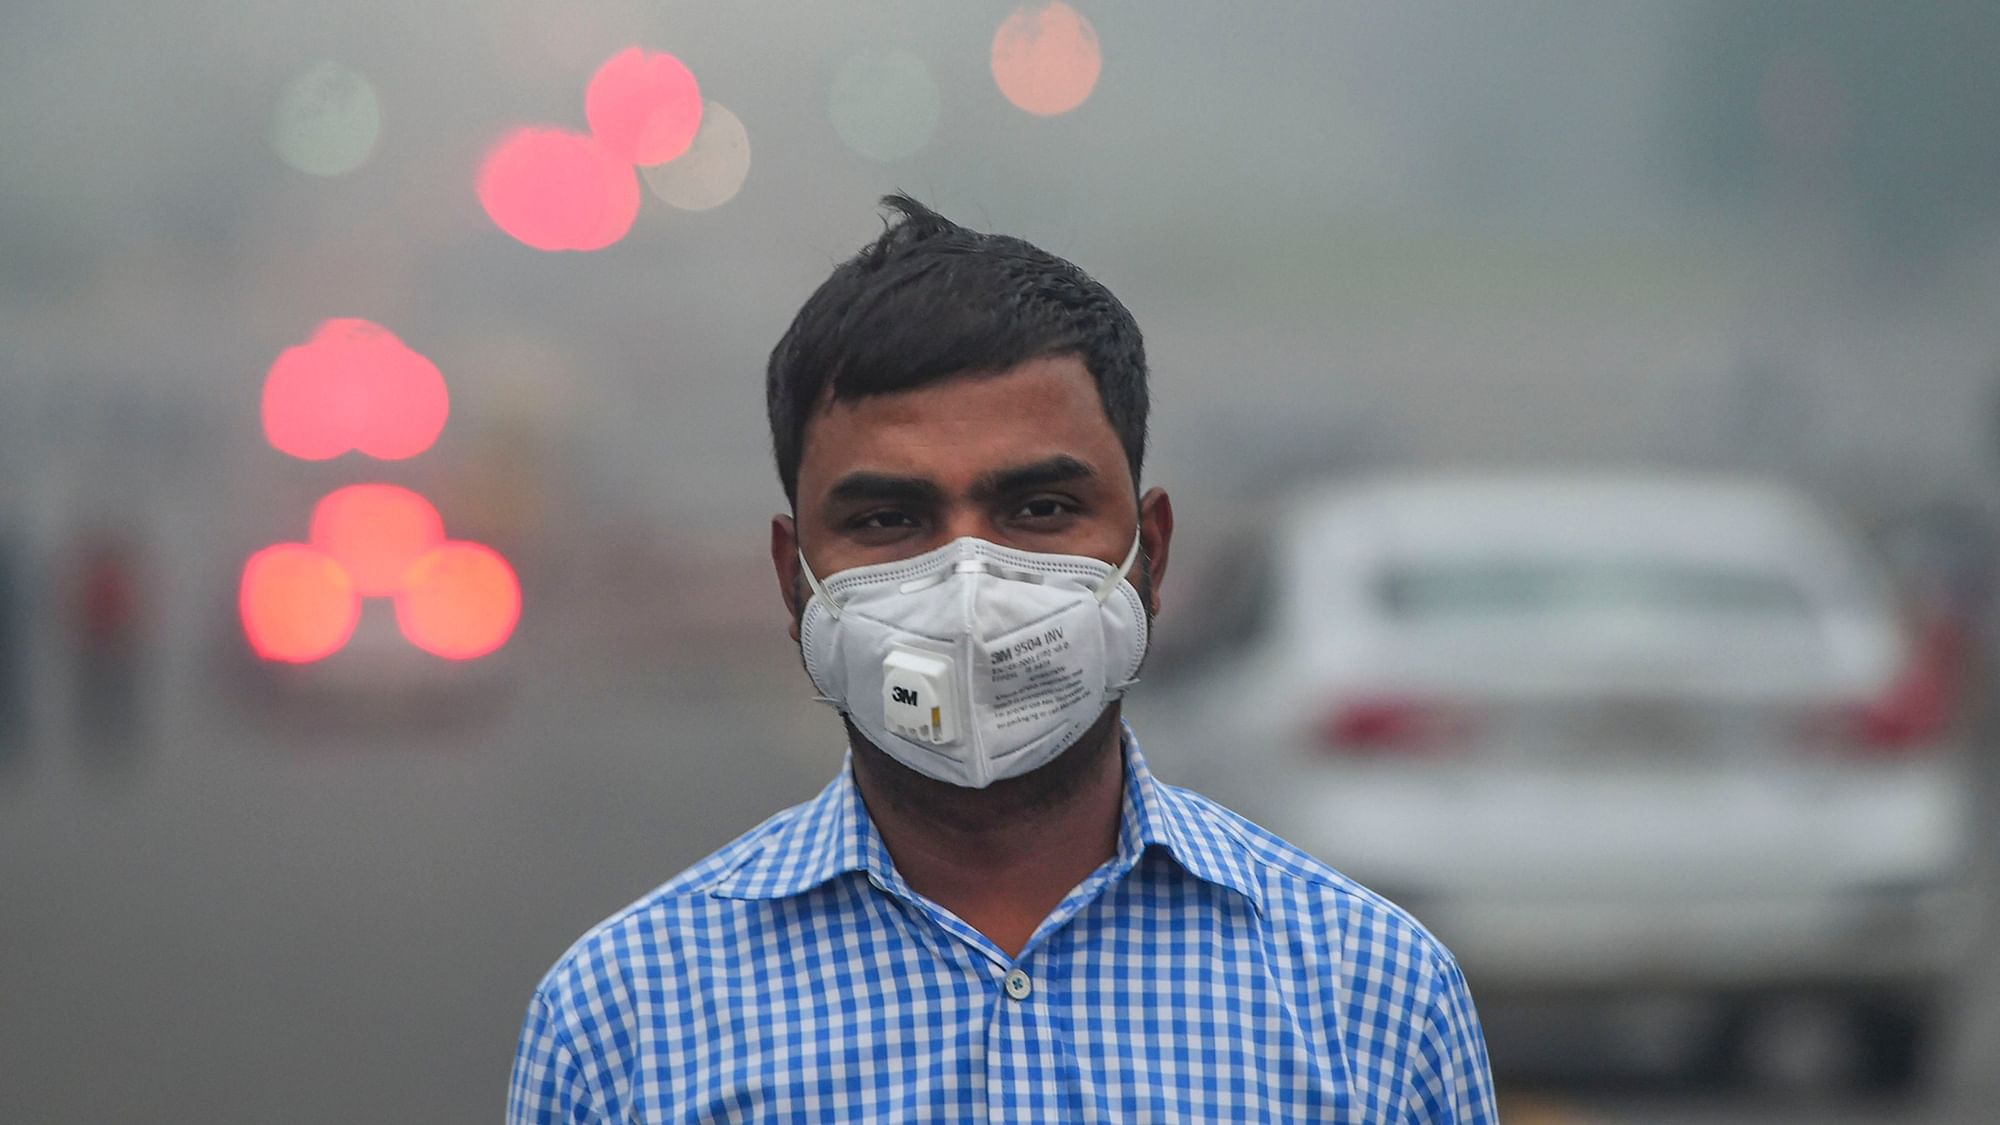 On Diwali night, air pollution was reportedly the lowest in 5 years.